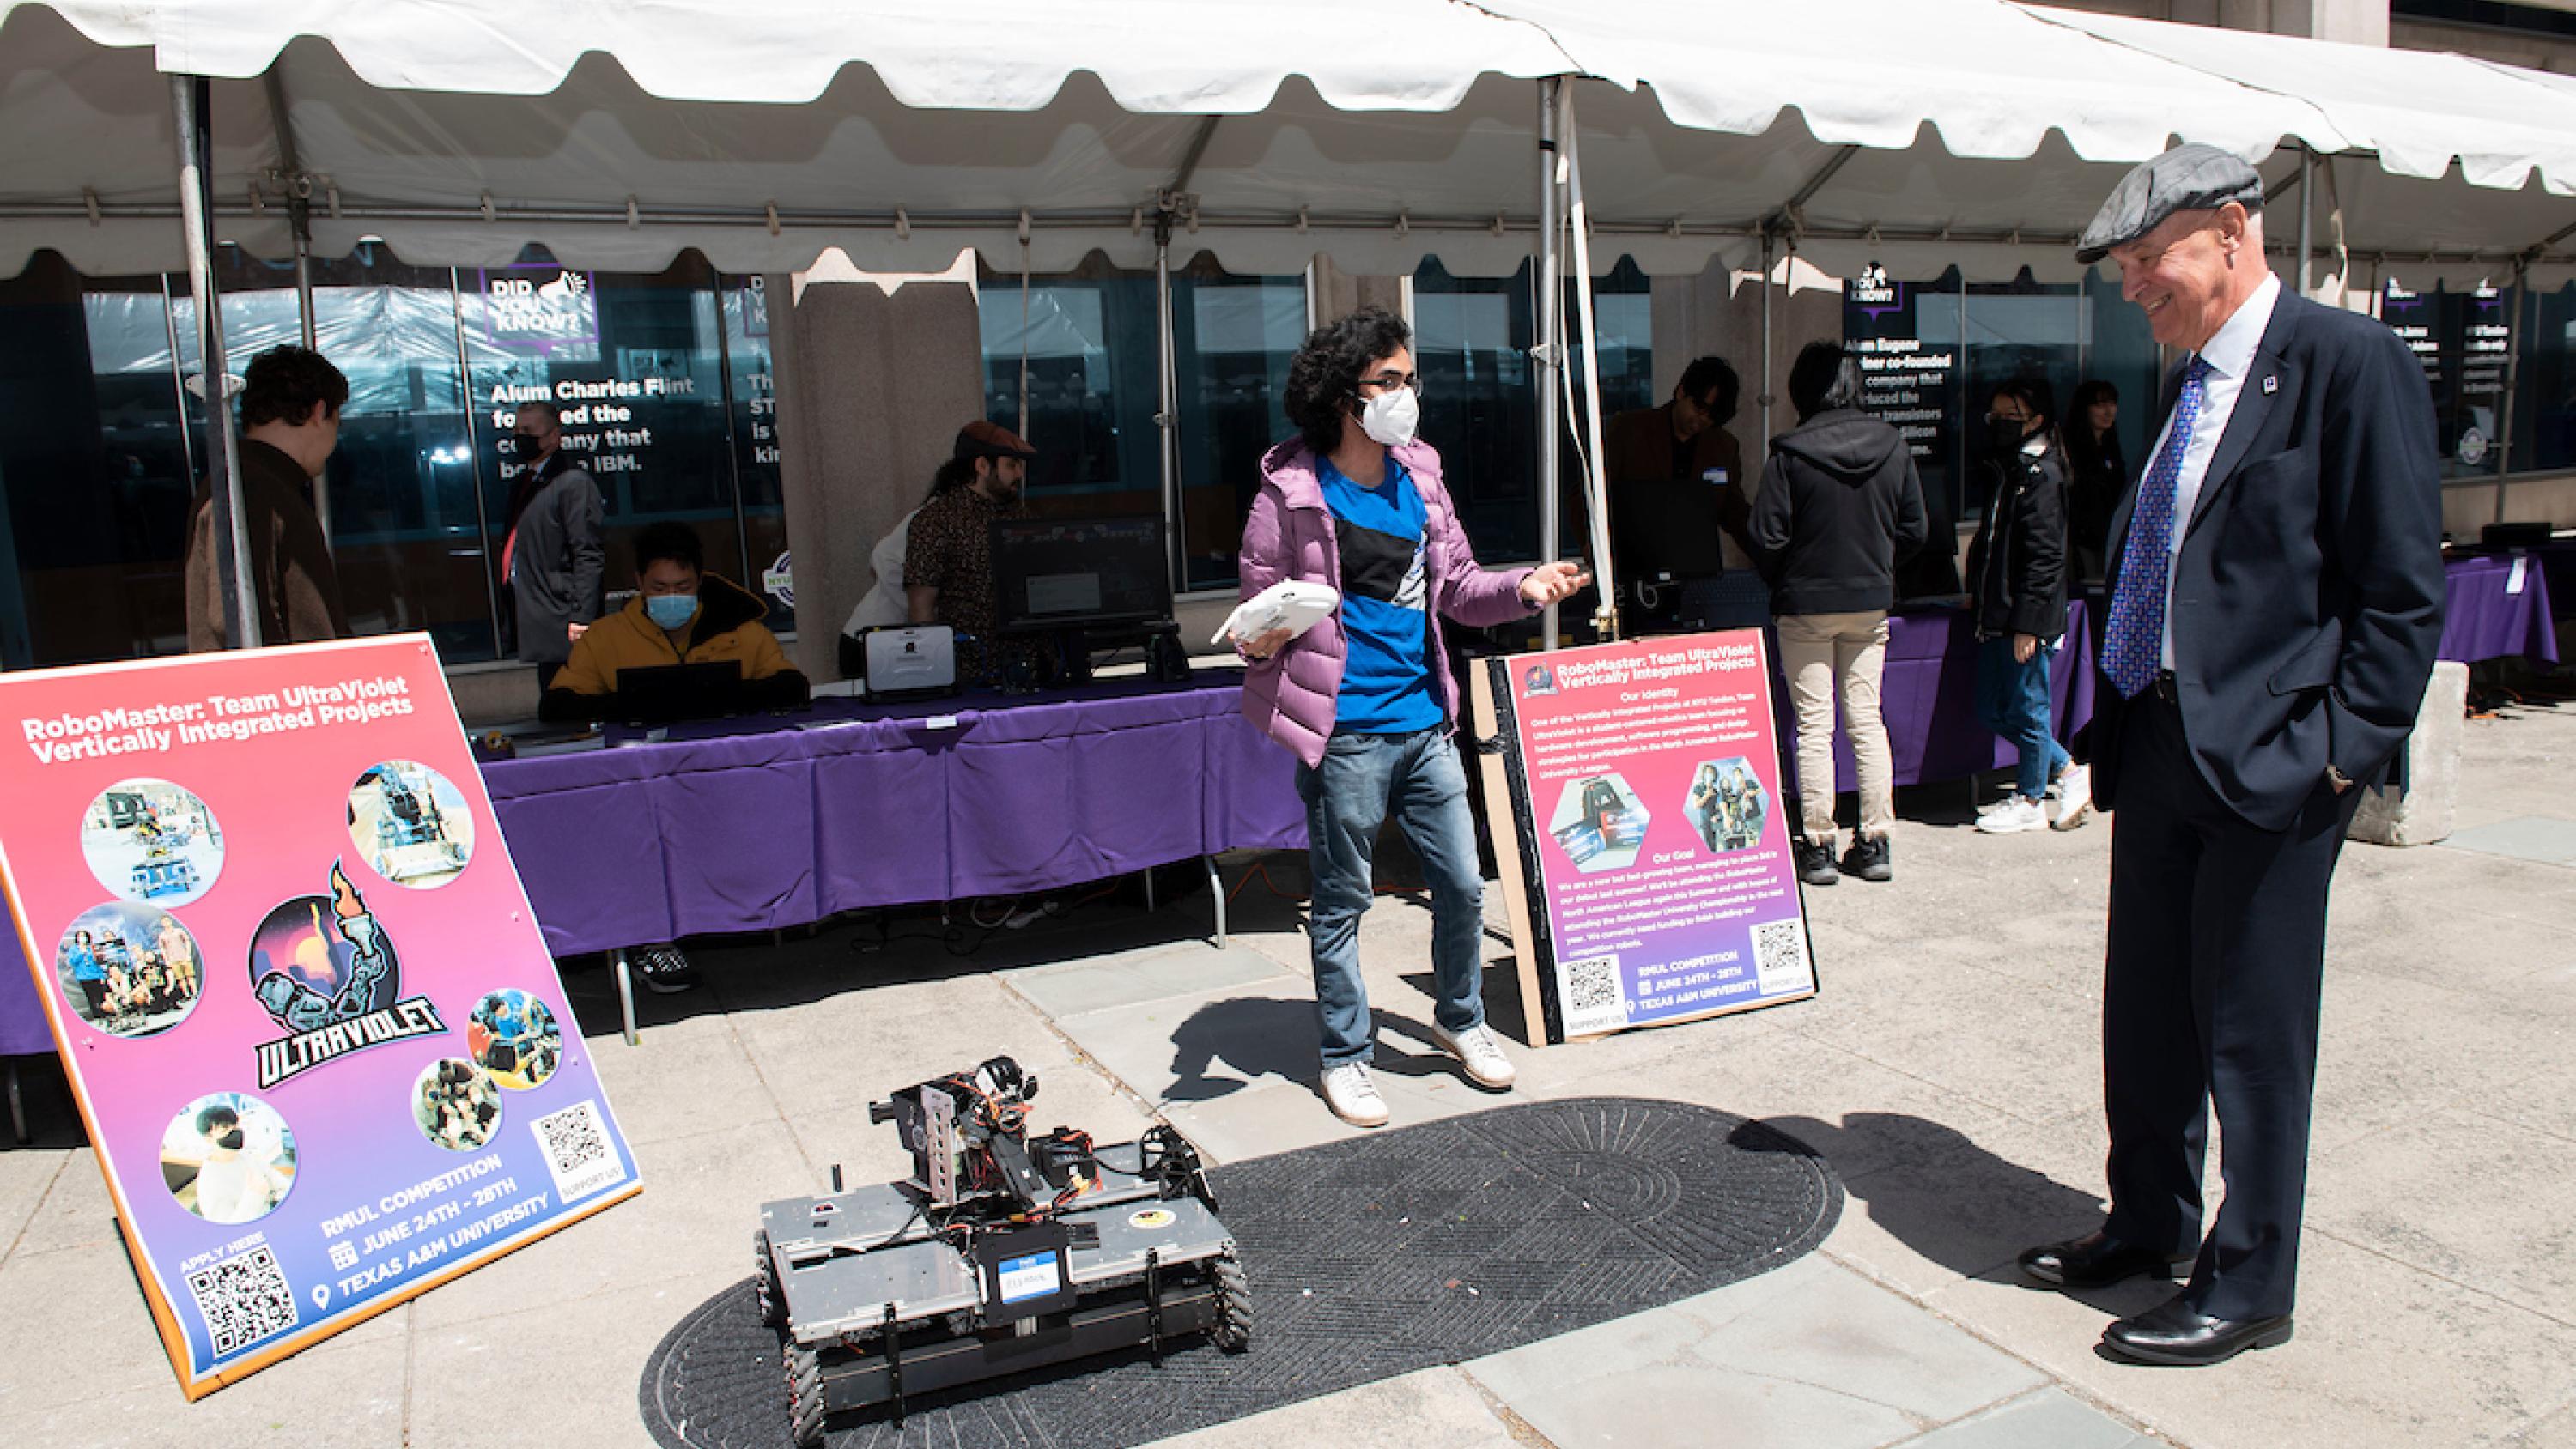 A student on the NYU RoboMaster Team UltraViolet, a Vertically Integrated Project, demonstrates a rover as NYU President Andrew Hamilton looks on at last year's Research Excellence Exhibit